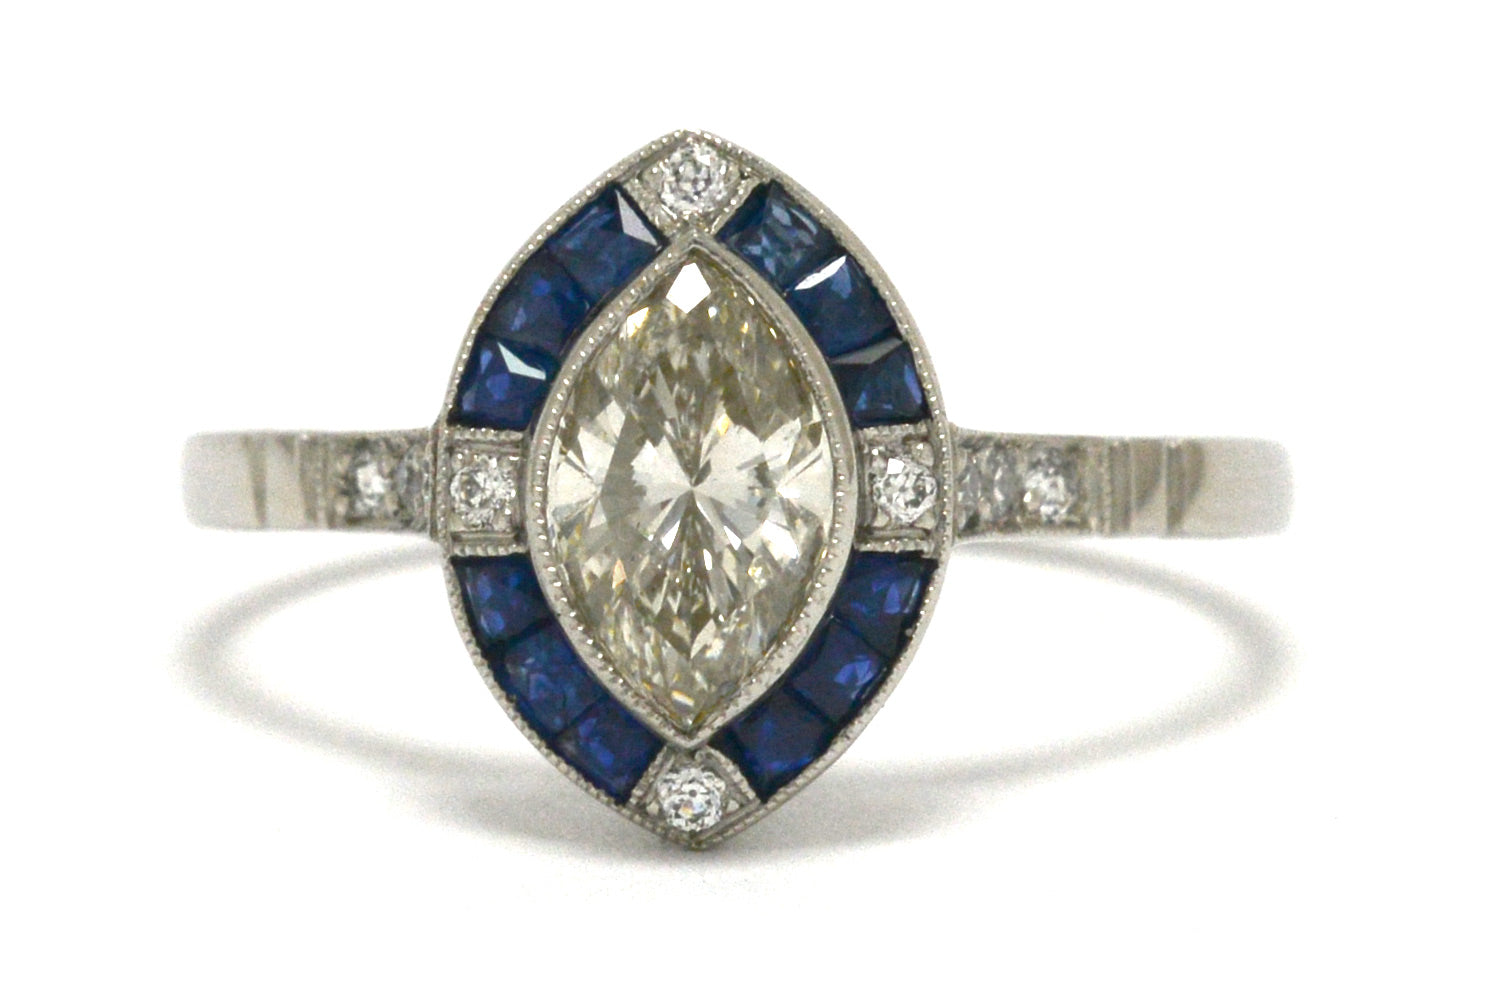 An Art Deco inspired marquise cut diamond engagement ring with a sapphire halo.